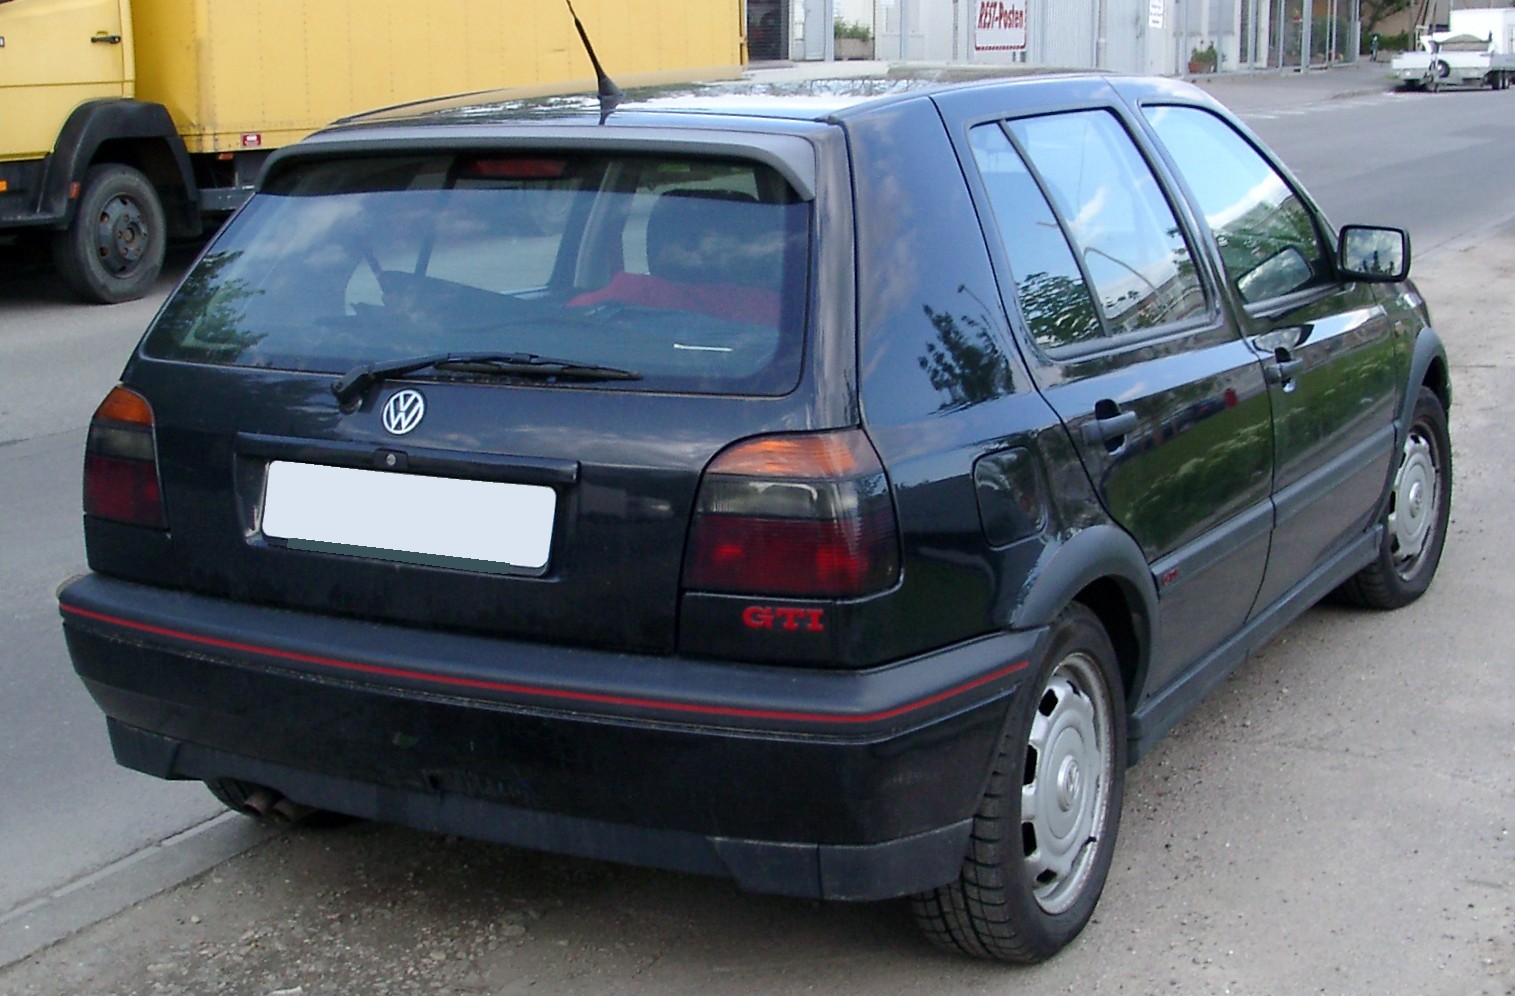 VW Golf 3 GTI technical details, history, photos on Better